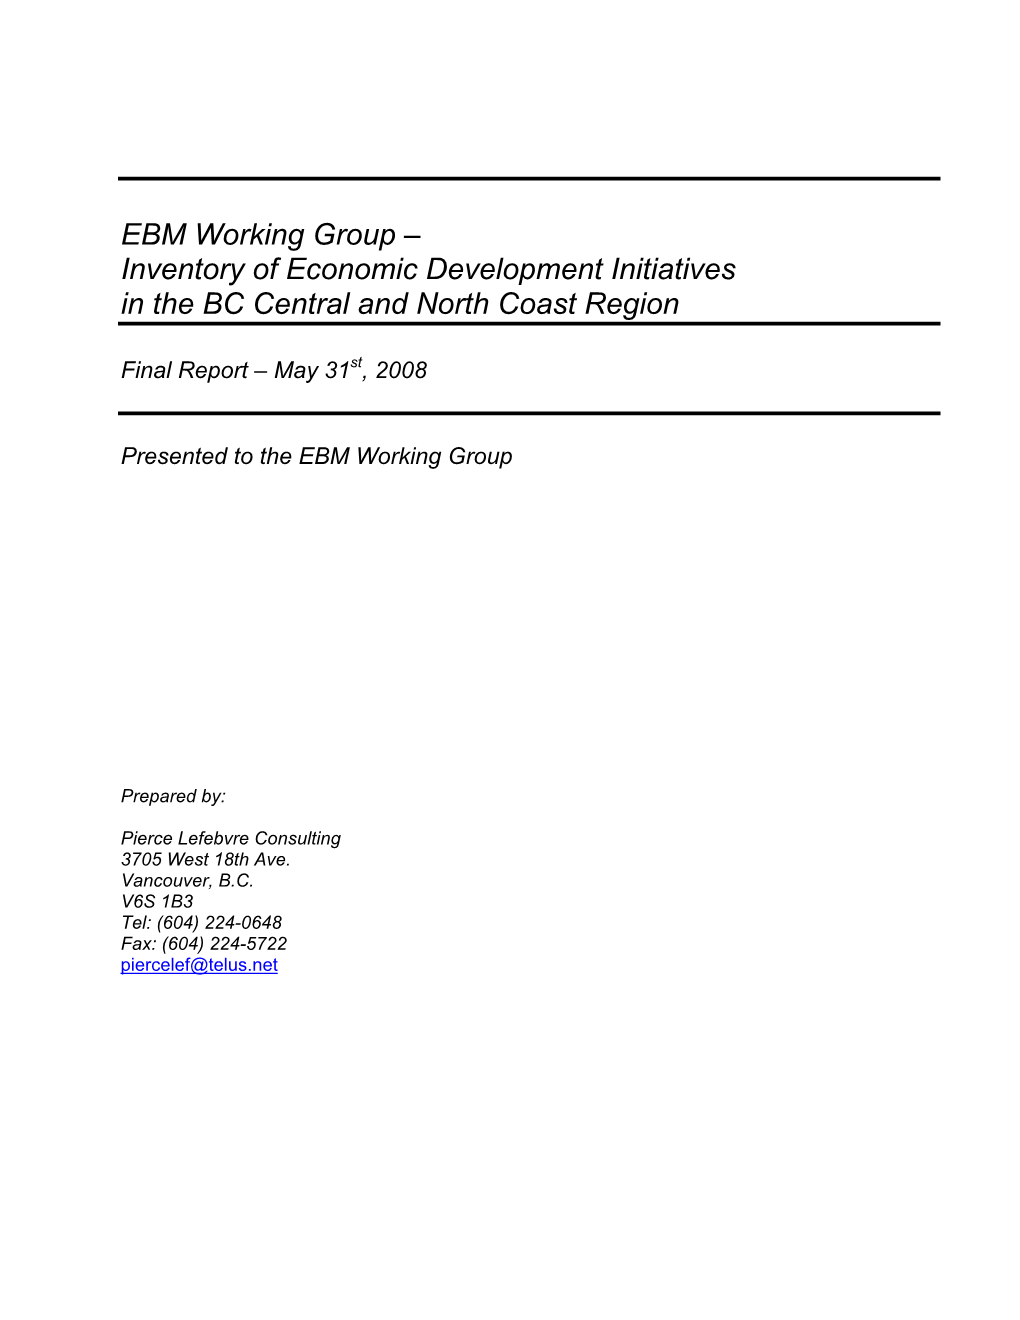 EBM Working Group – Inventory of Economic Development Initiatives in the BC Central and North Coast Region